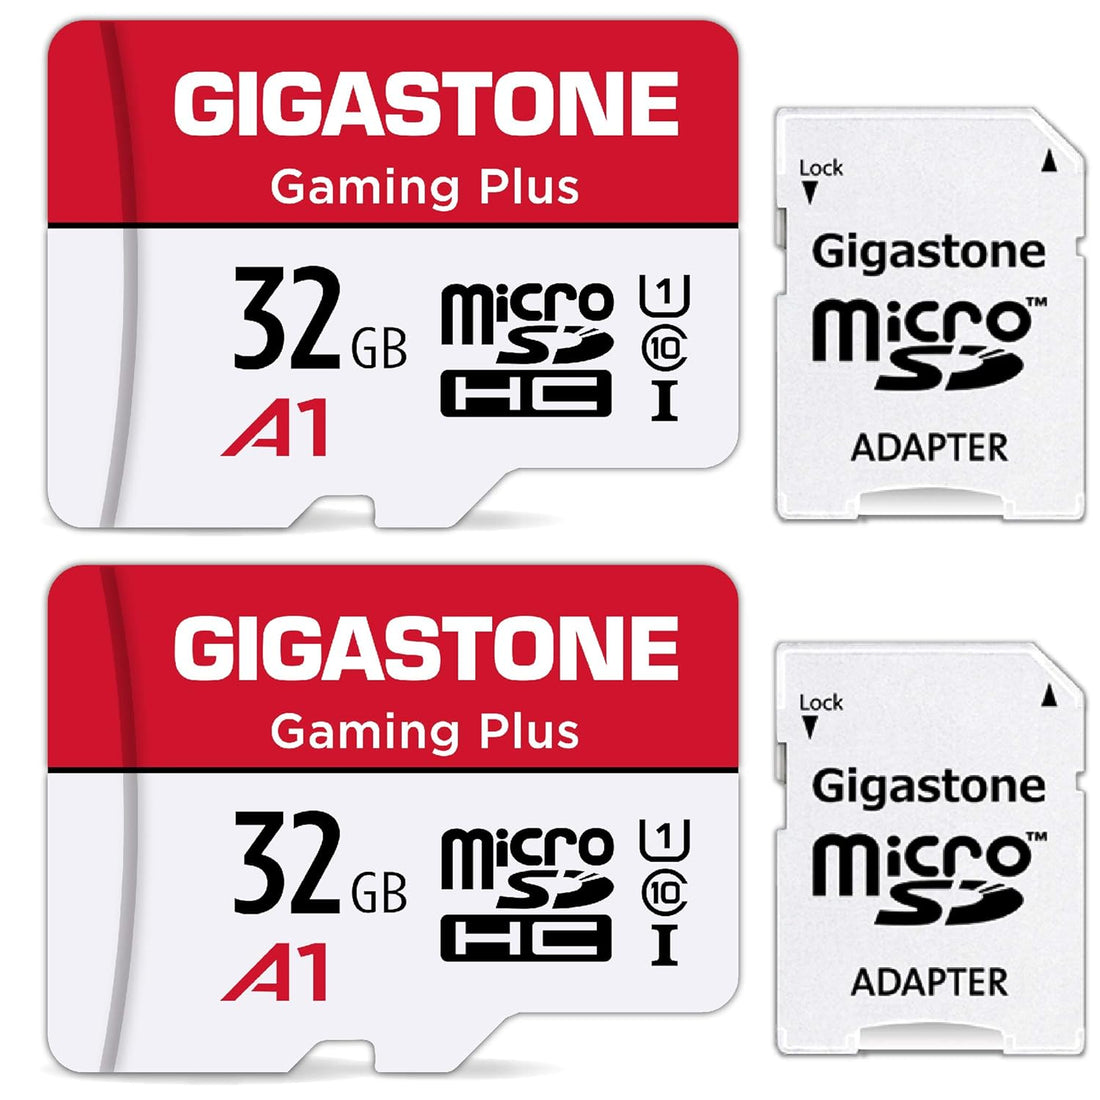 [Gigastone] Micro SD Card 32GB 2 Pack, Gaming Plus, MicroSDHC Memory Card for Nintendo-Switch, Smartpone, Roku, Full HD Video Recording, UHS-I U1 A1 Class 10, up to 90MB/s, with SD Adapter